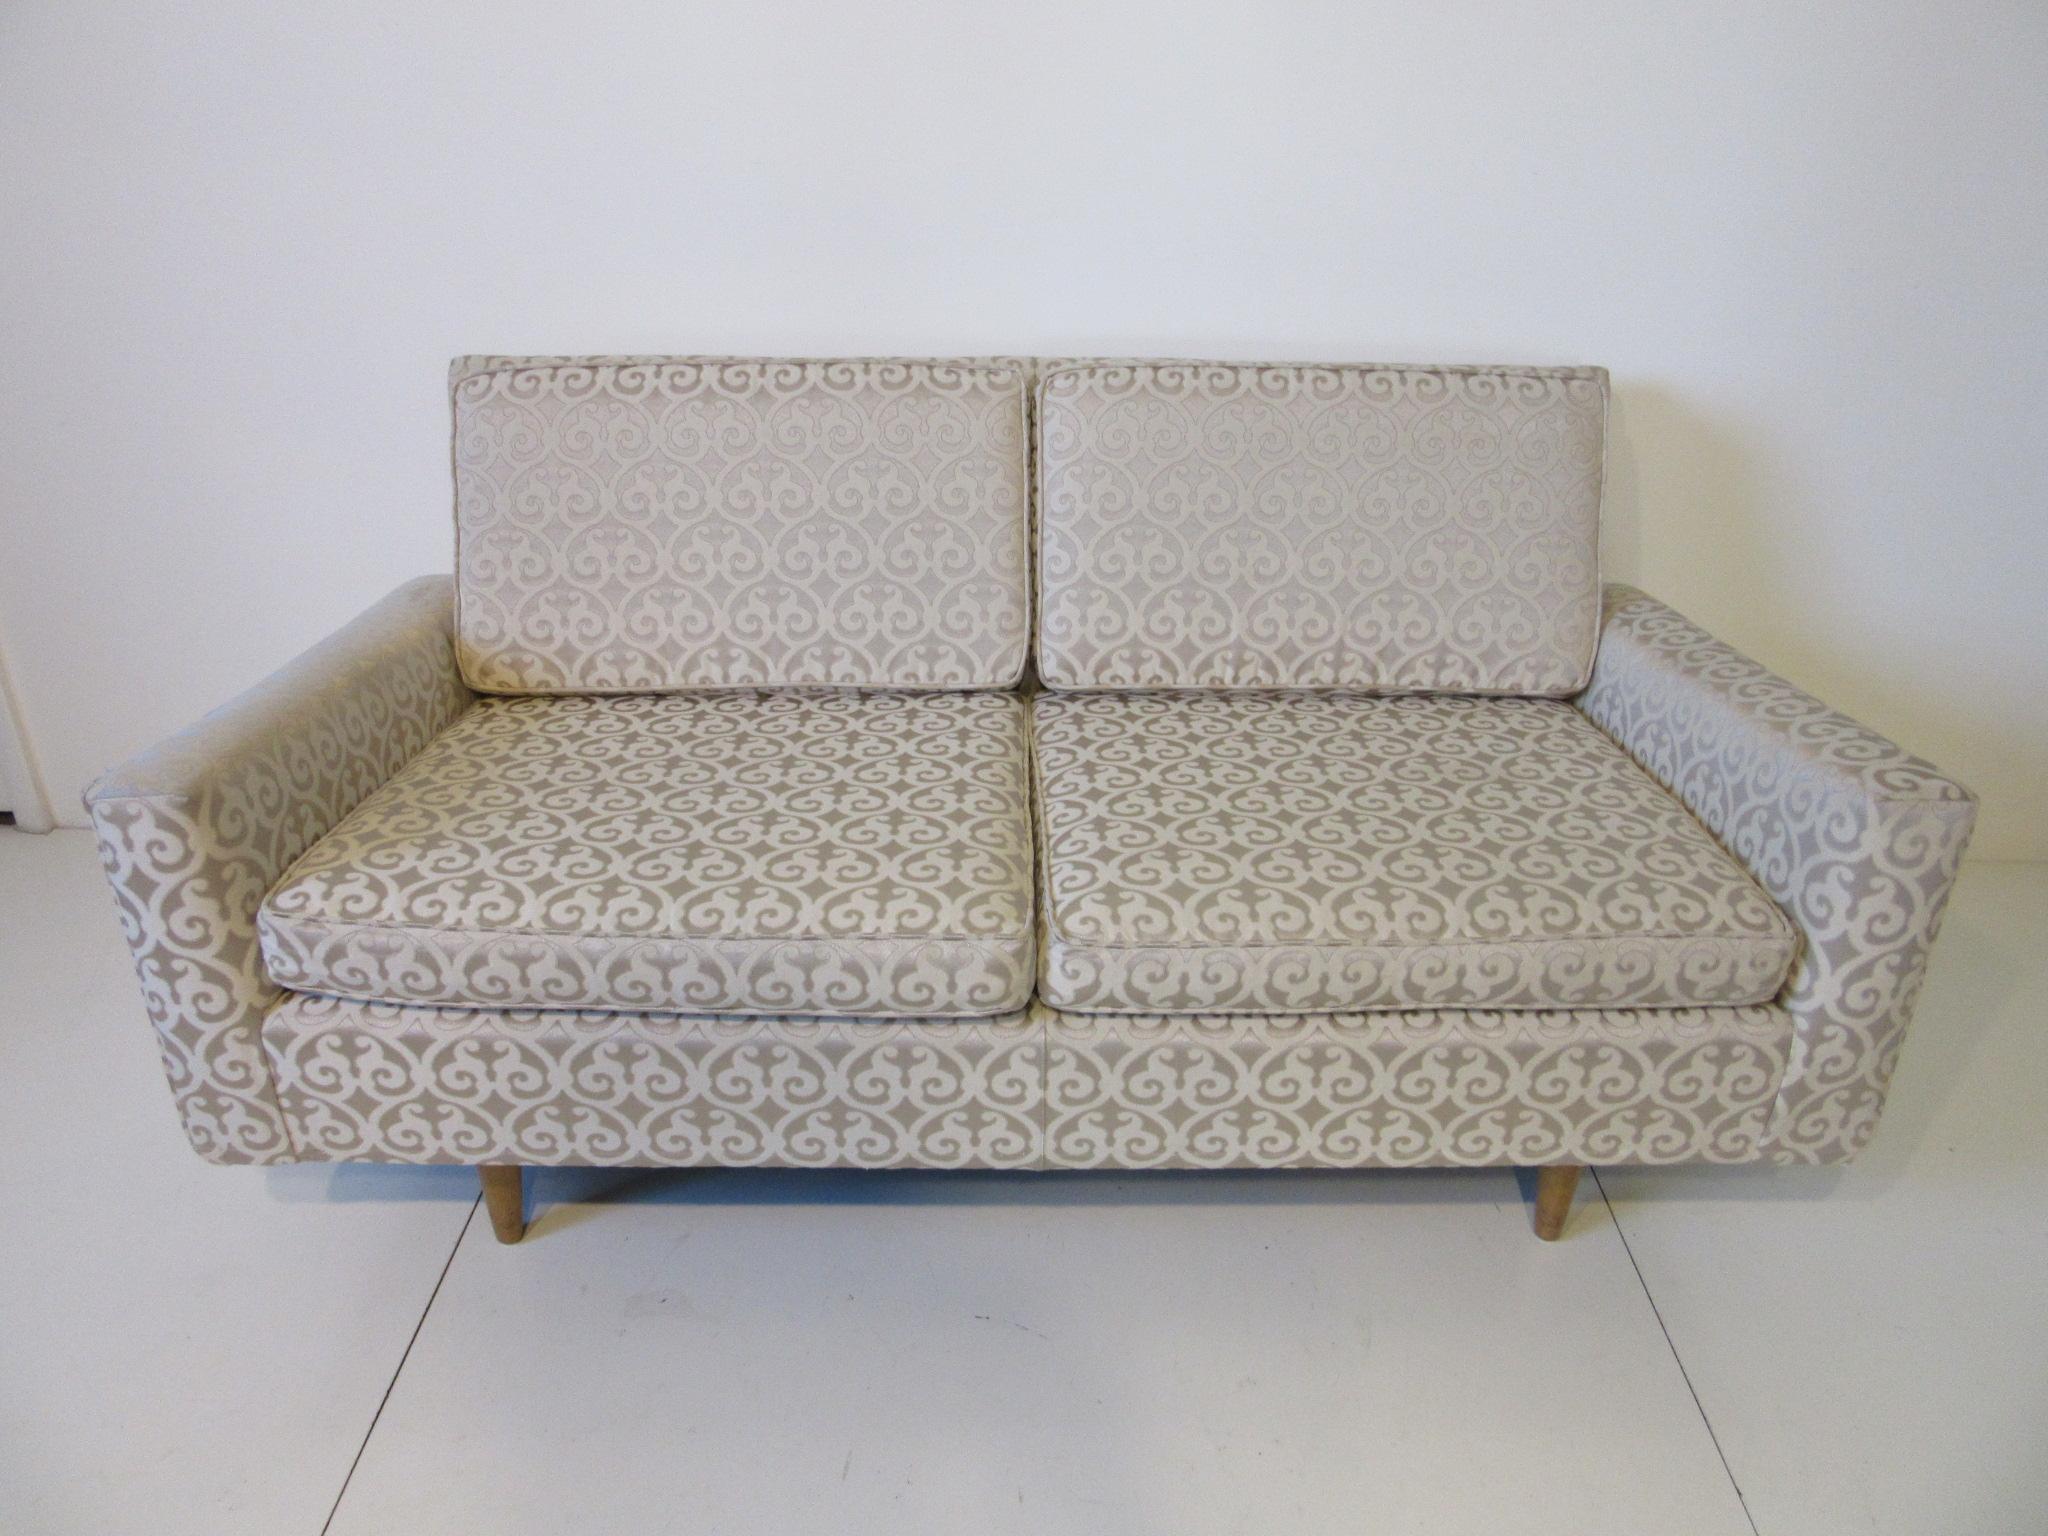 Fabric Florence Knoll Settee / Loveseat by Knoll